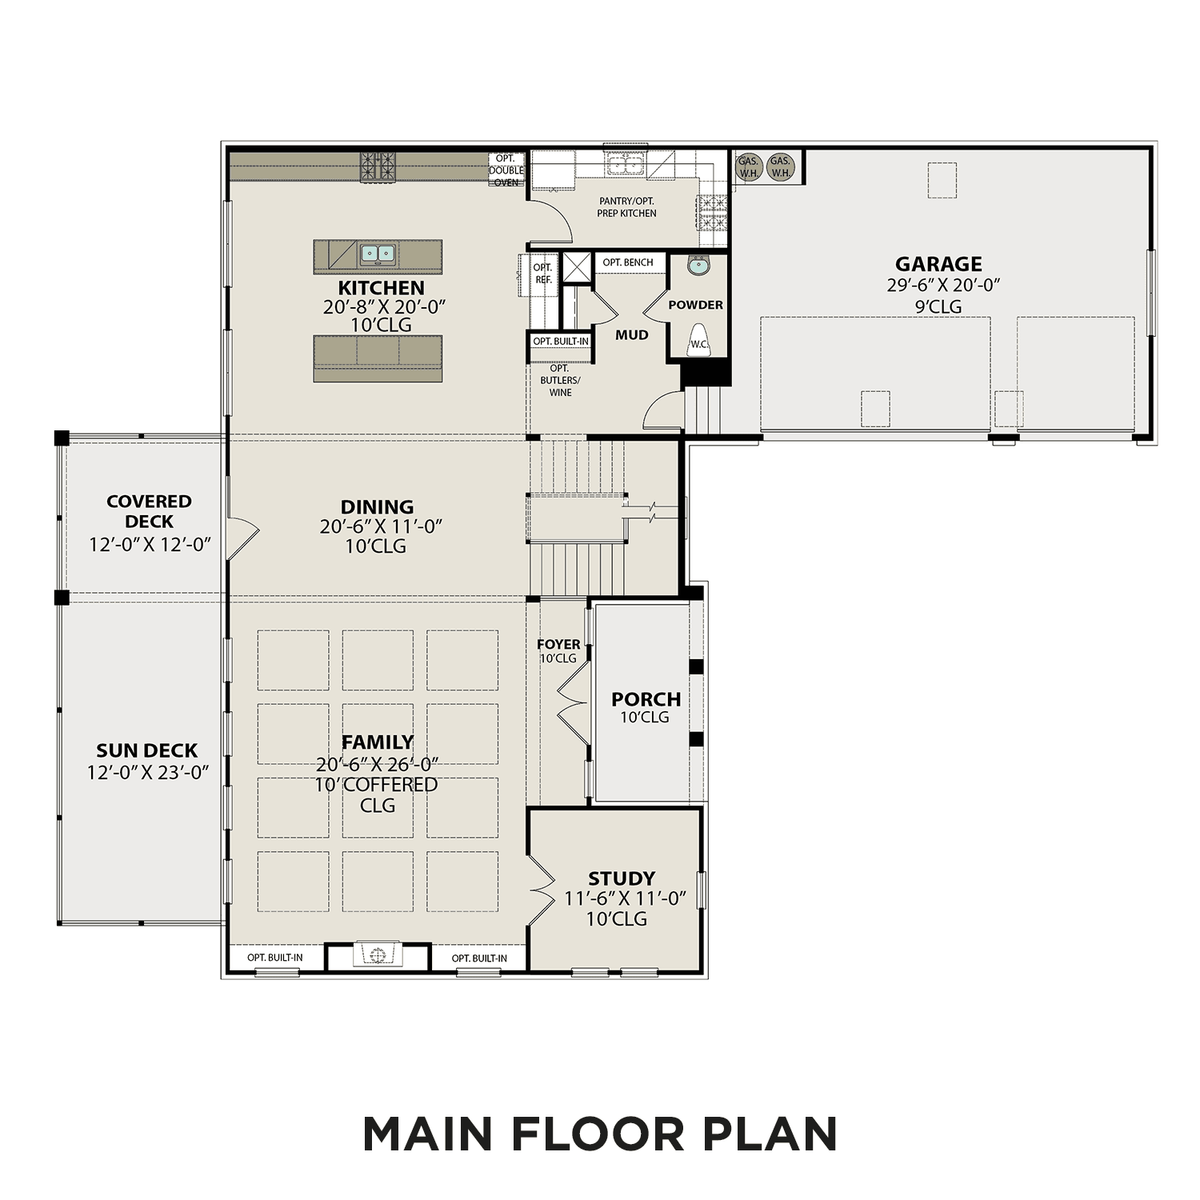 1 - The Alston A floor plan layout for 5408 Maroon Drive in Davidson Homes' Shelton Square community.